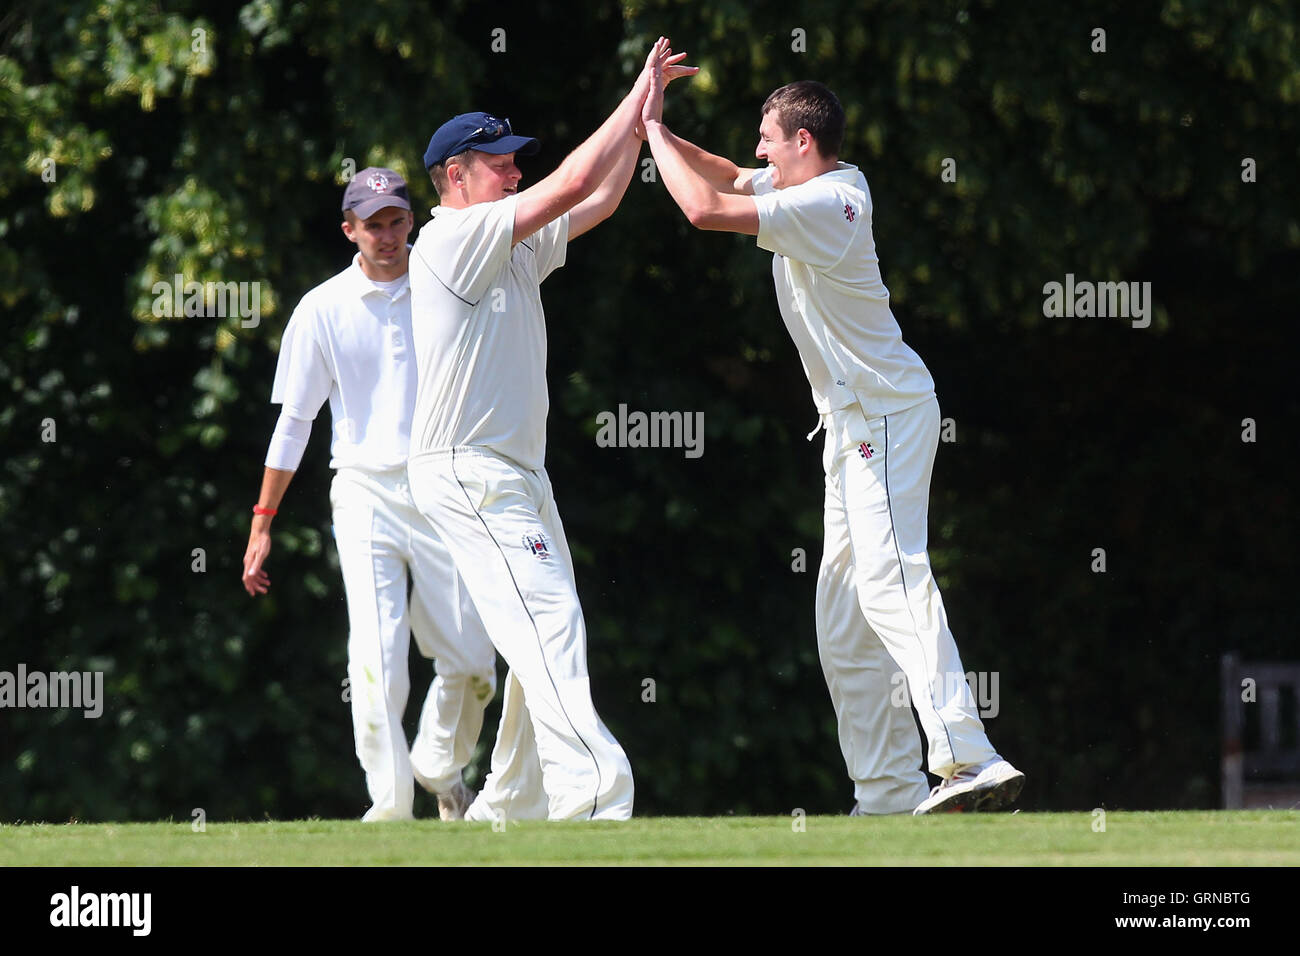 M Roe of Havering (R) celebrates the fourth Herongate wicket - Herongate CC vs Havering-atte-Bower CC - Mid-Essex Cricket League - 21/06/14 Stock Photo